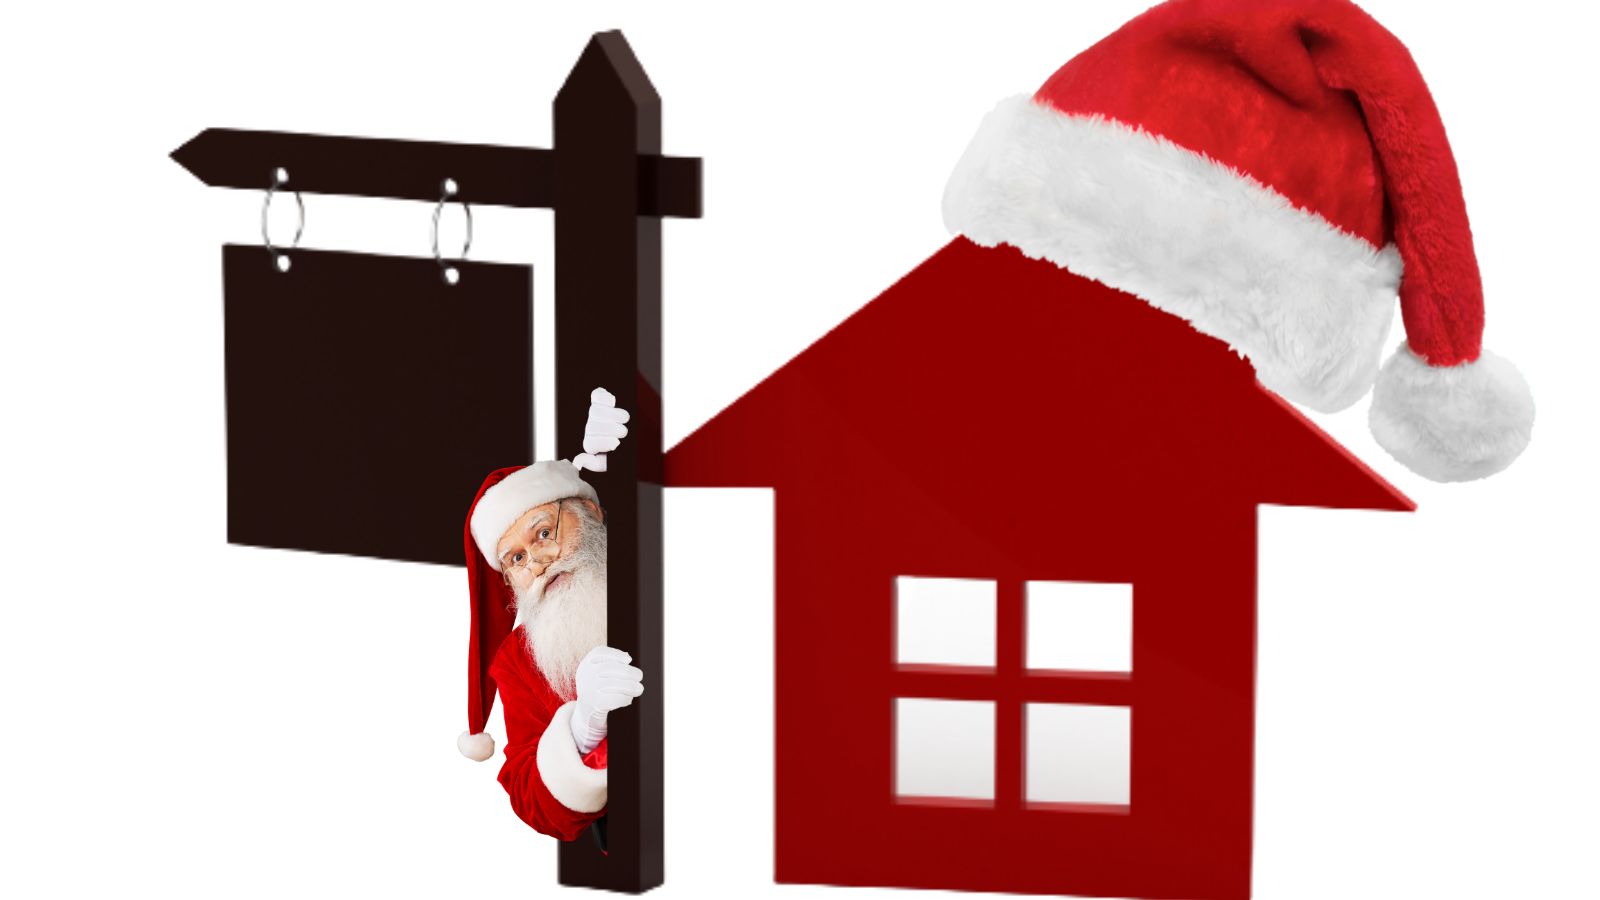 conventional-wisdom-is-that-december-is-the-worst-month-to-sell-a-home